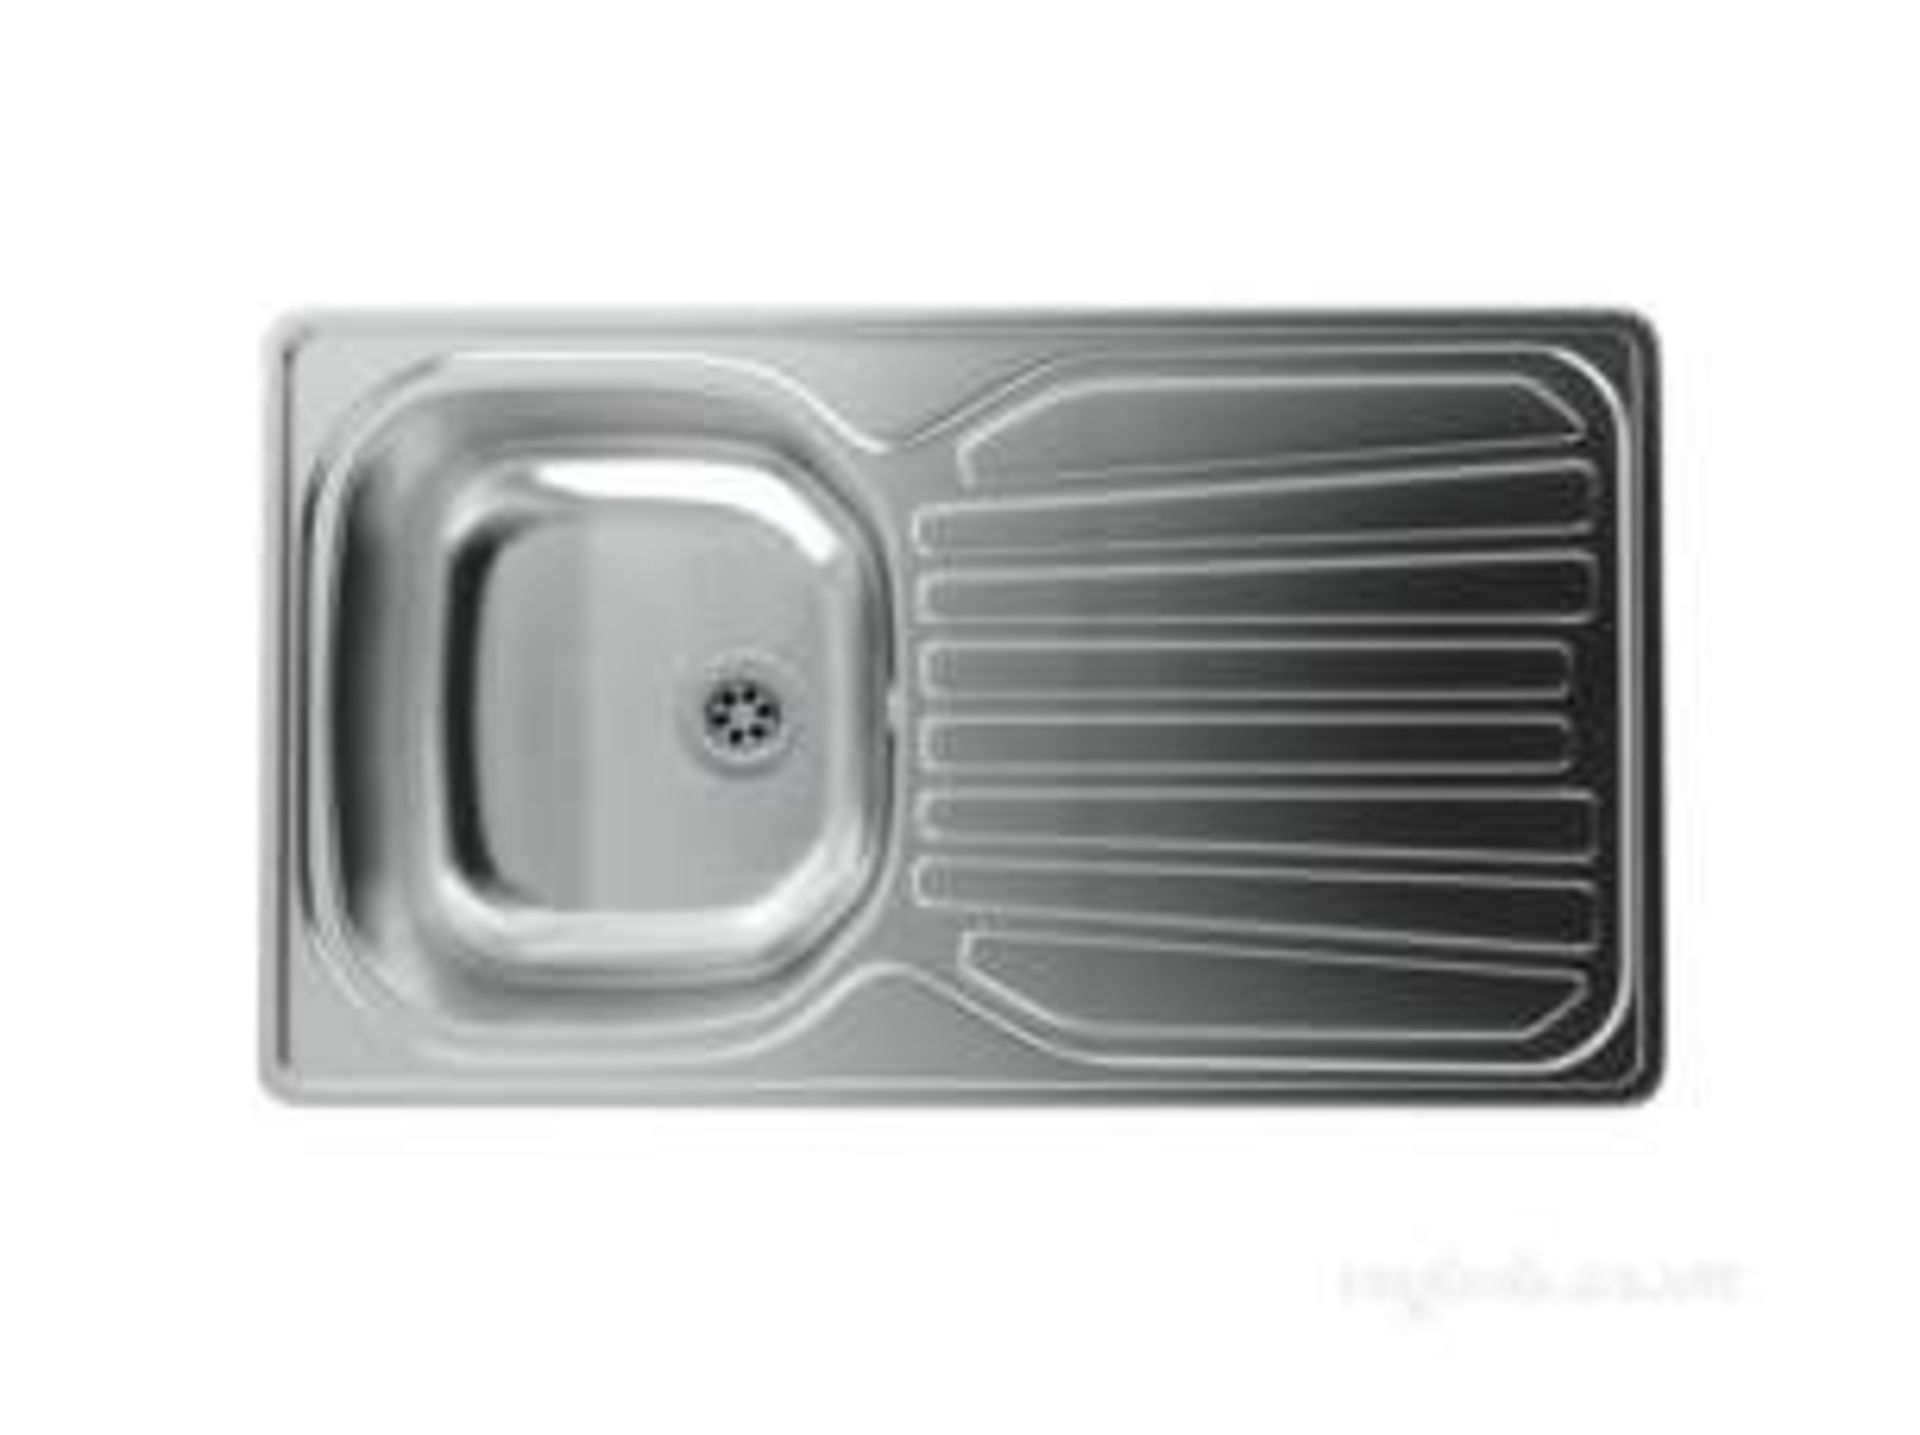 (SV138) PRECISION PLUS 90XB TWO TAP HOLES REV SINK. RRP £149.99. 101.0171.527 Stainless Ste...